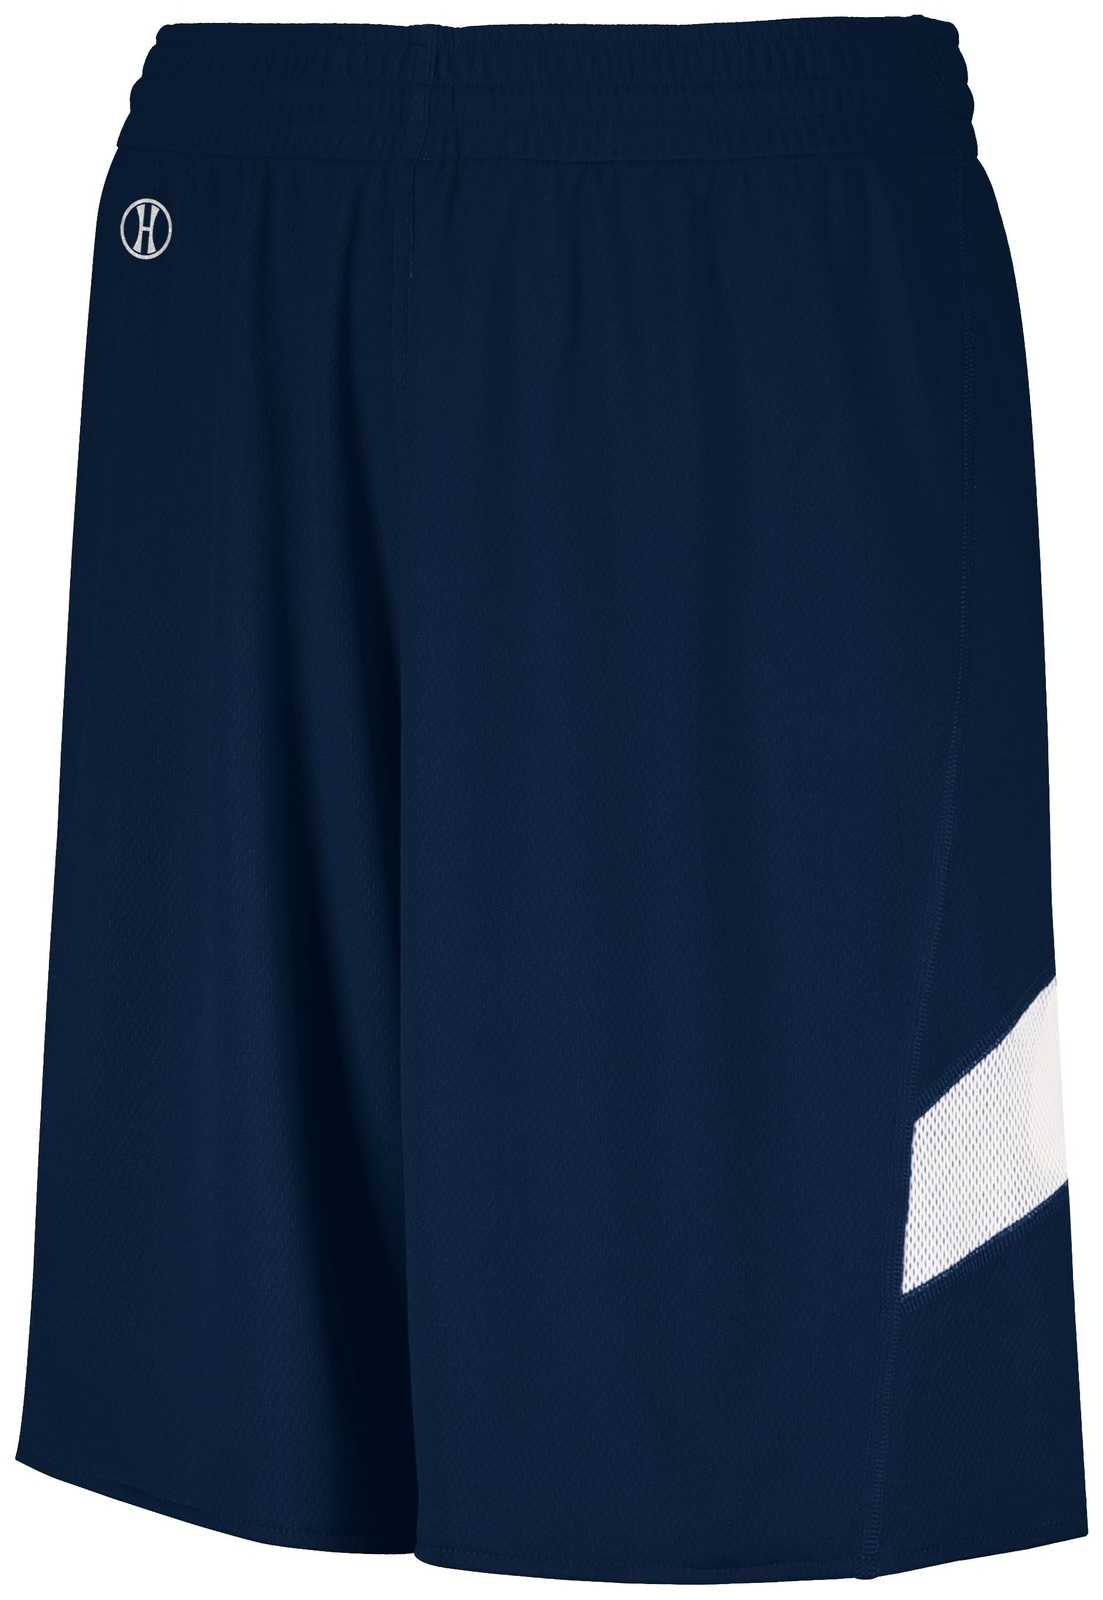 Holloway 224279 Youth Dual-Side Single Ply Basketball Shorts - Navy White - HIT a Double